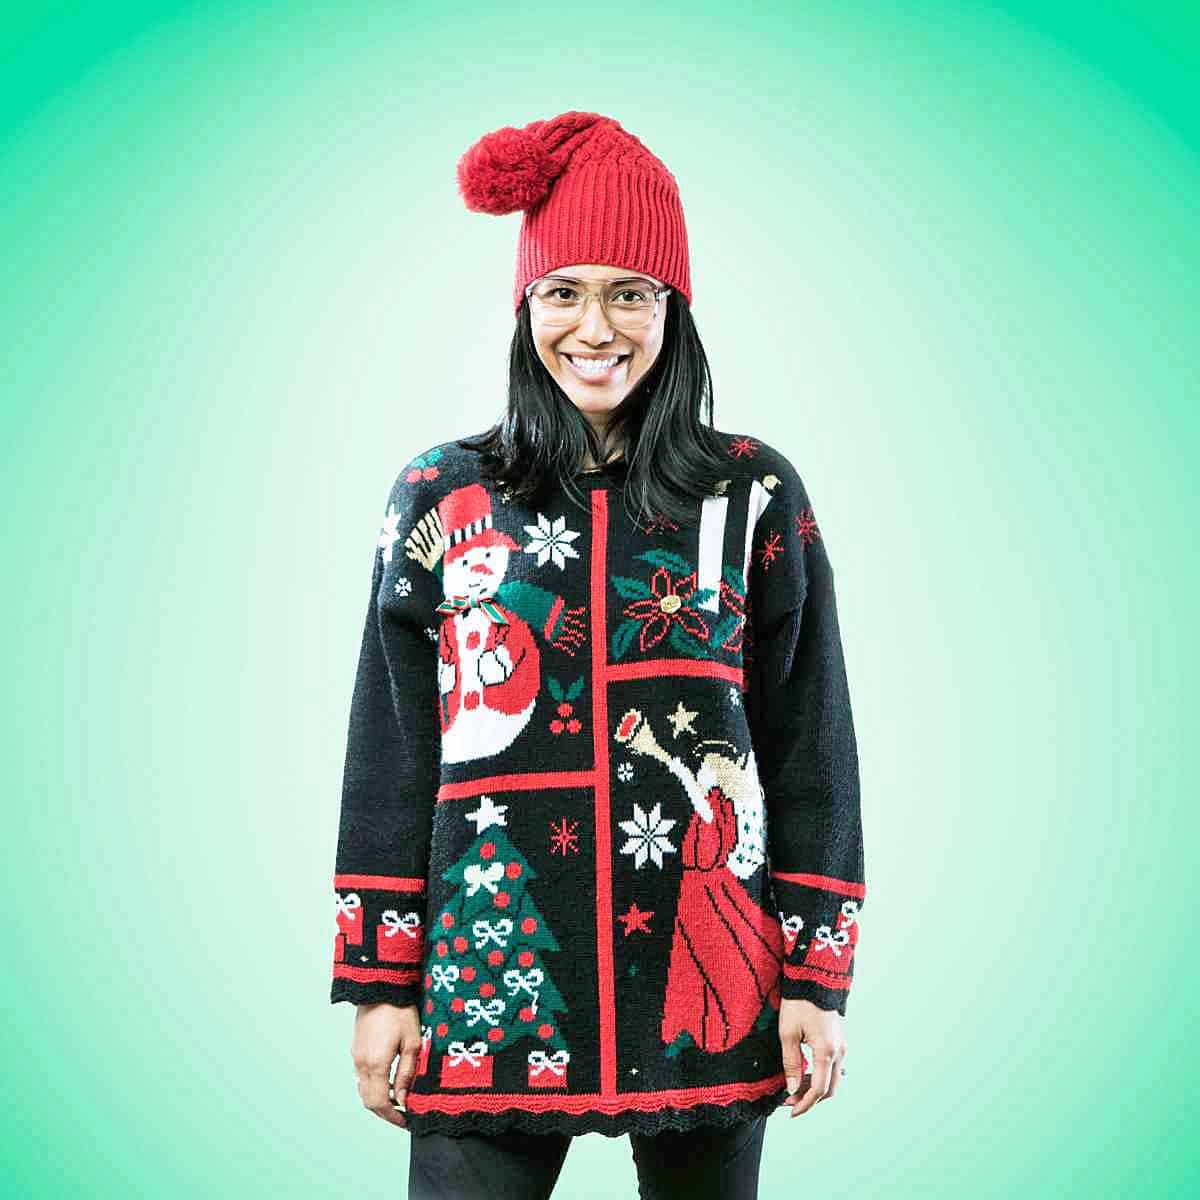 A woman wearing an ugly Christmas sweater and a red knit hat.